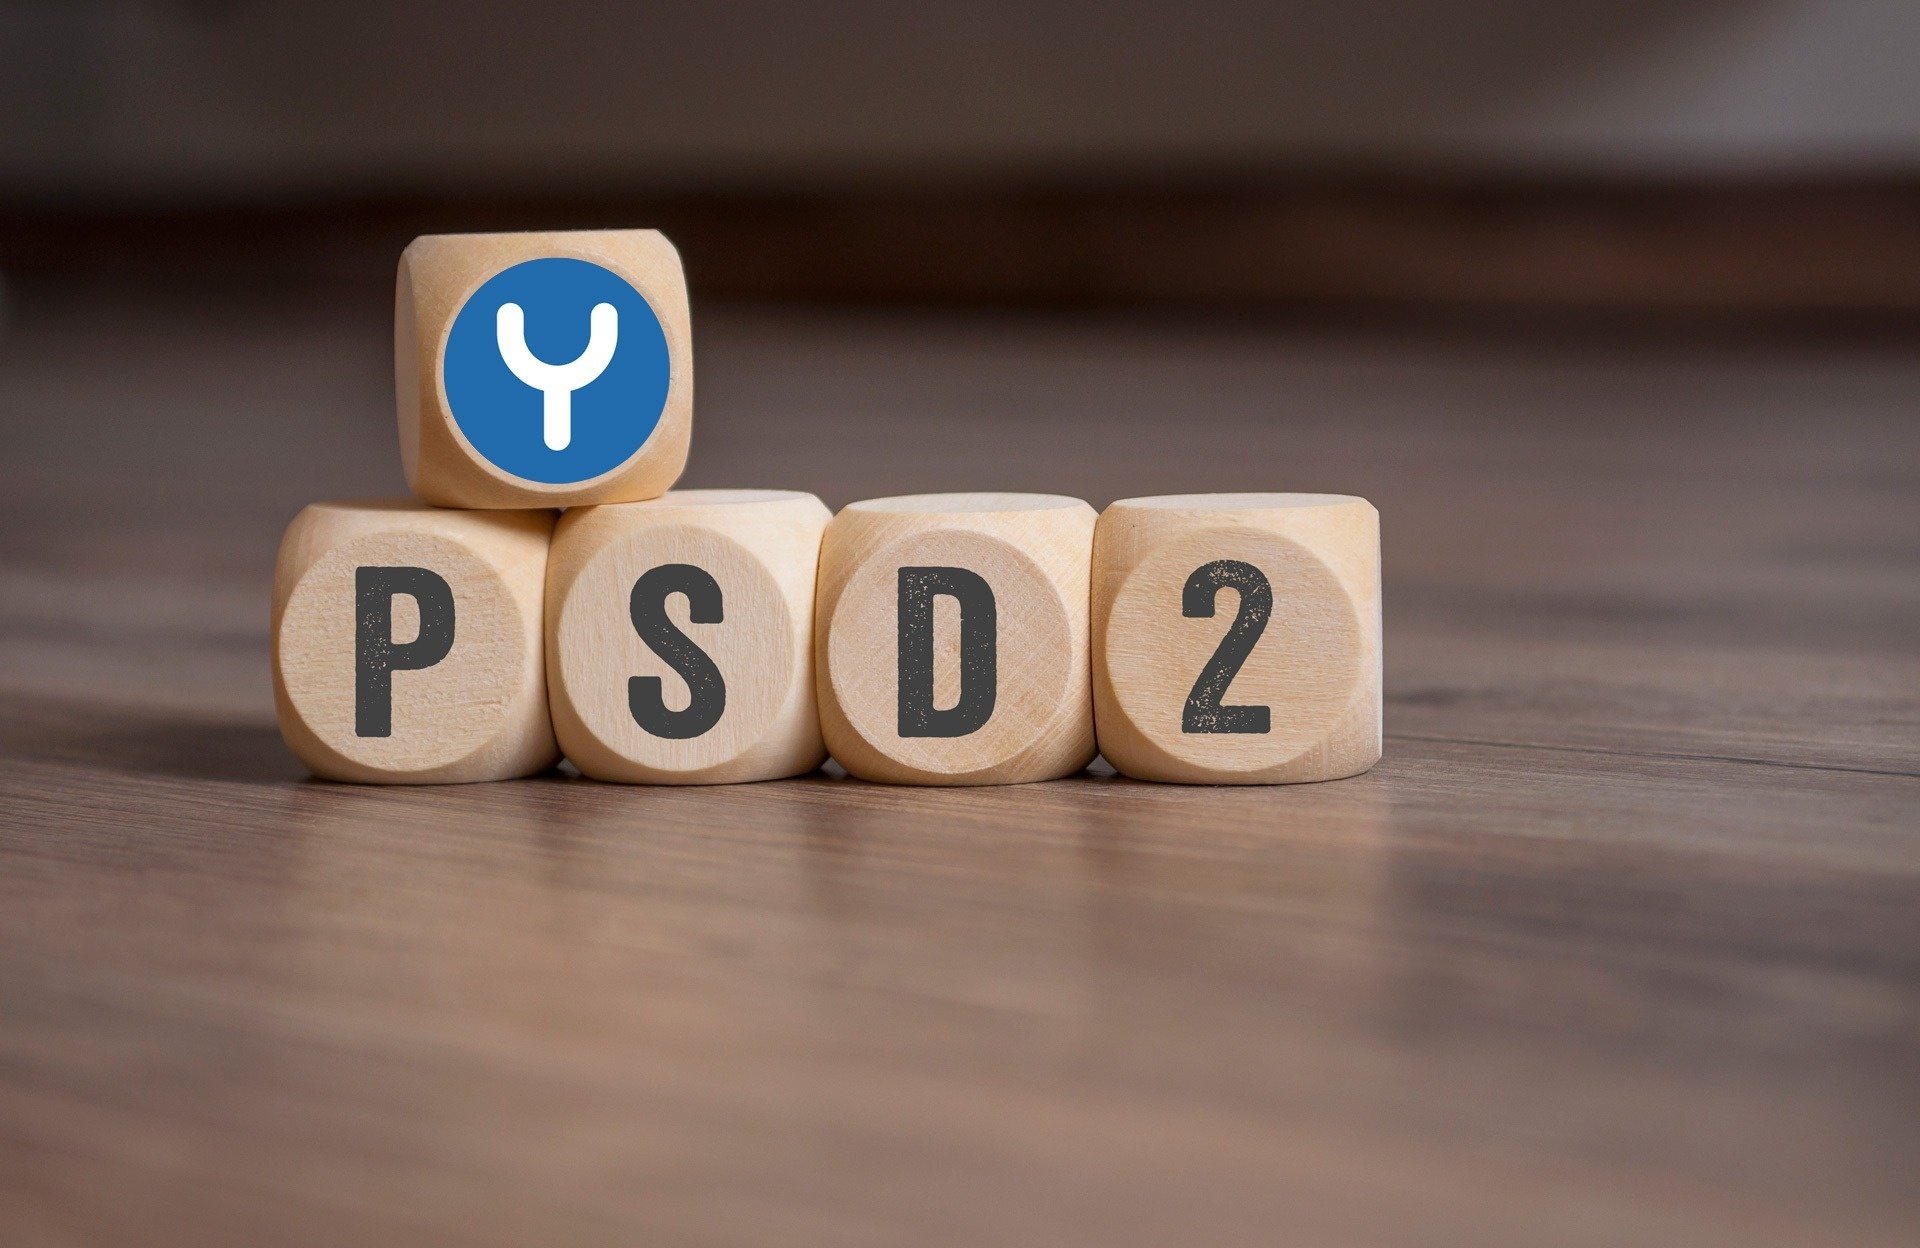 Slowly but surely: 12/31/20 deadline for PSD2